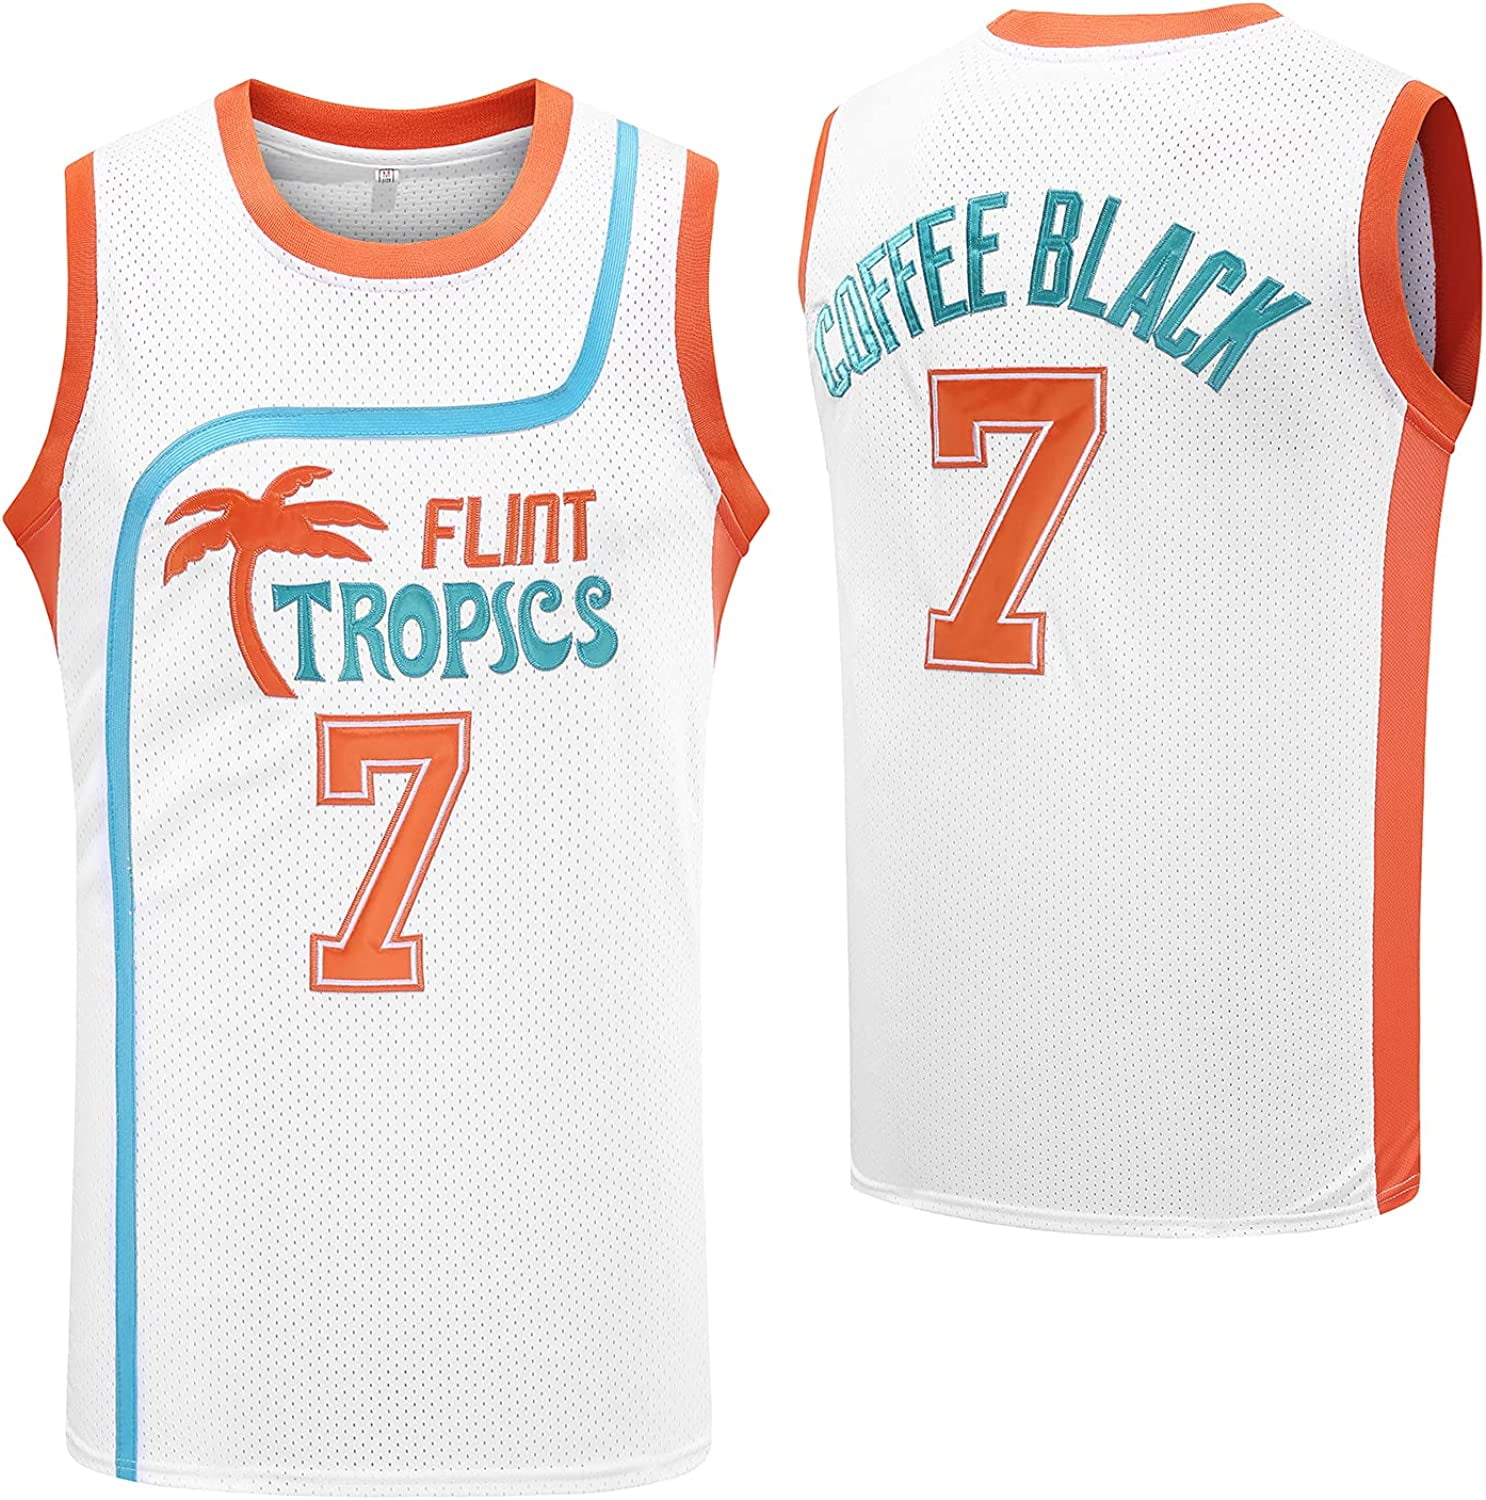  Jackie Moon Basketball Player Flint Tropics #33 Jersey and  Shorts Halloween Costume Cosplay : Clothing, Shoes & Jewelry